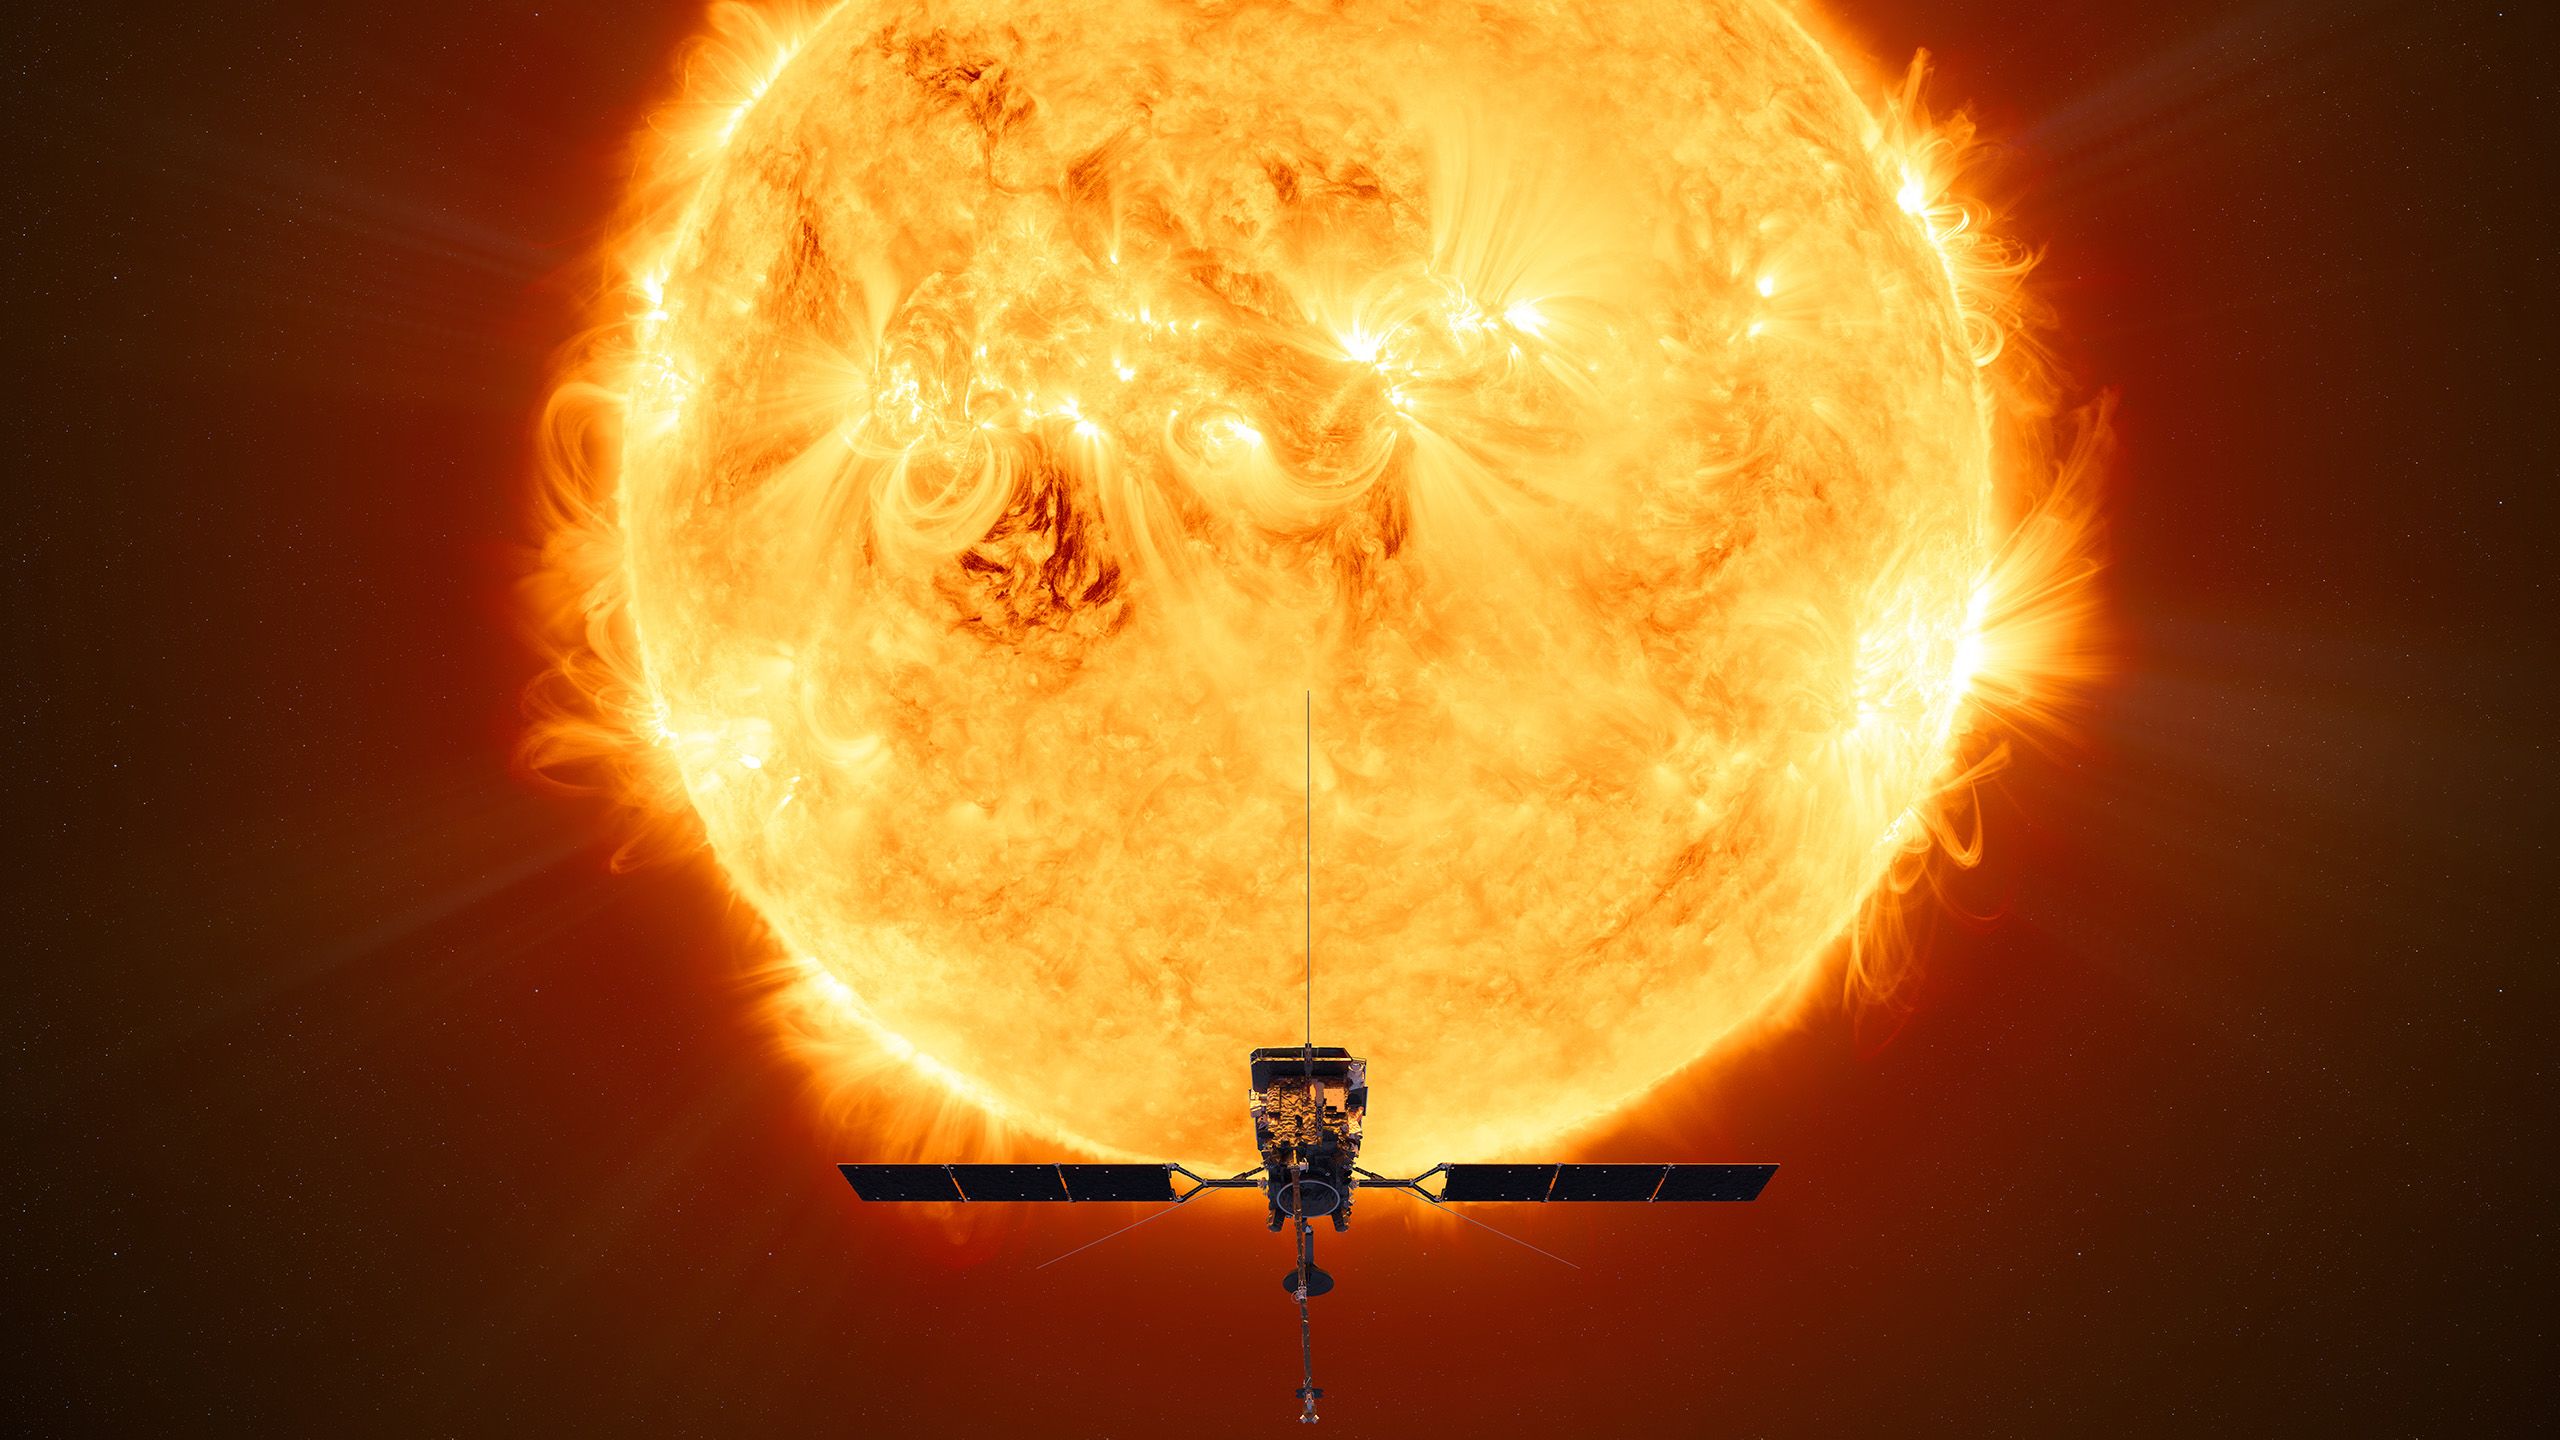 Illustration of a spacecraft facing the sun